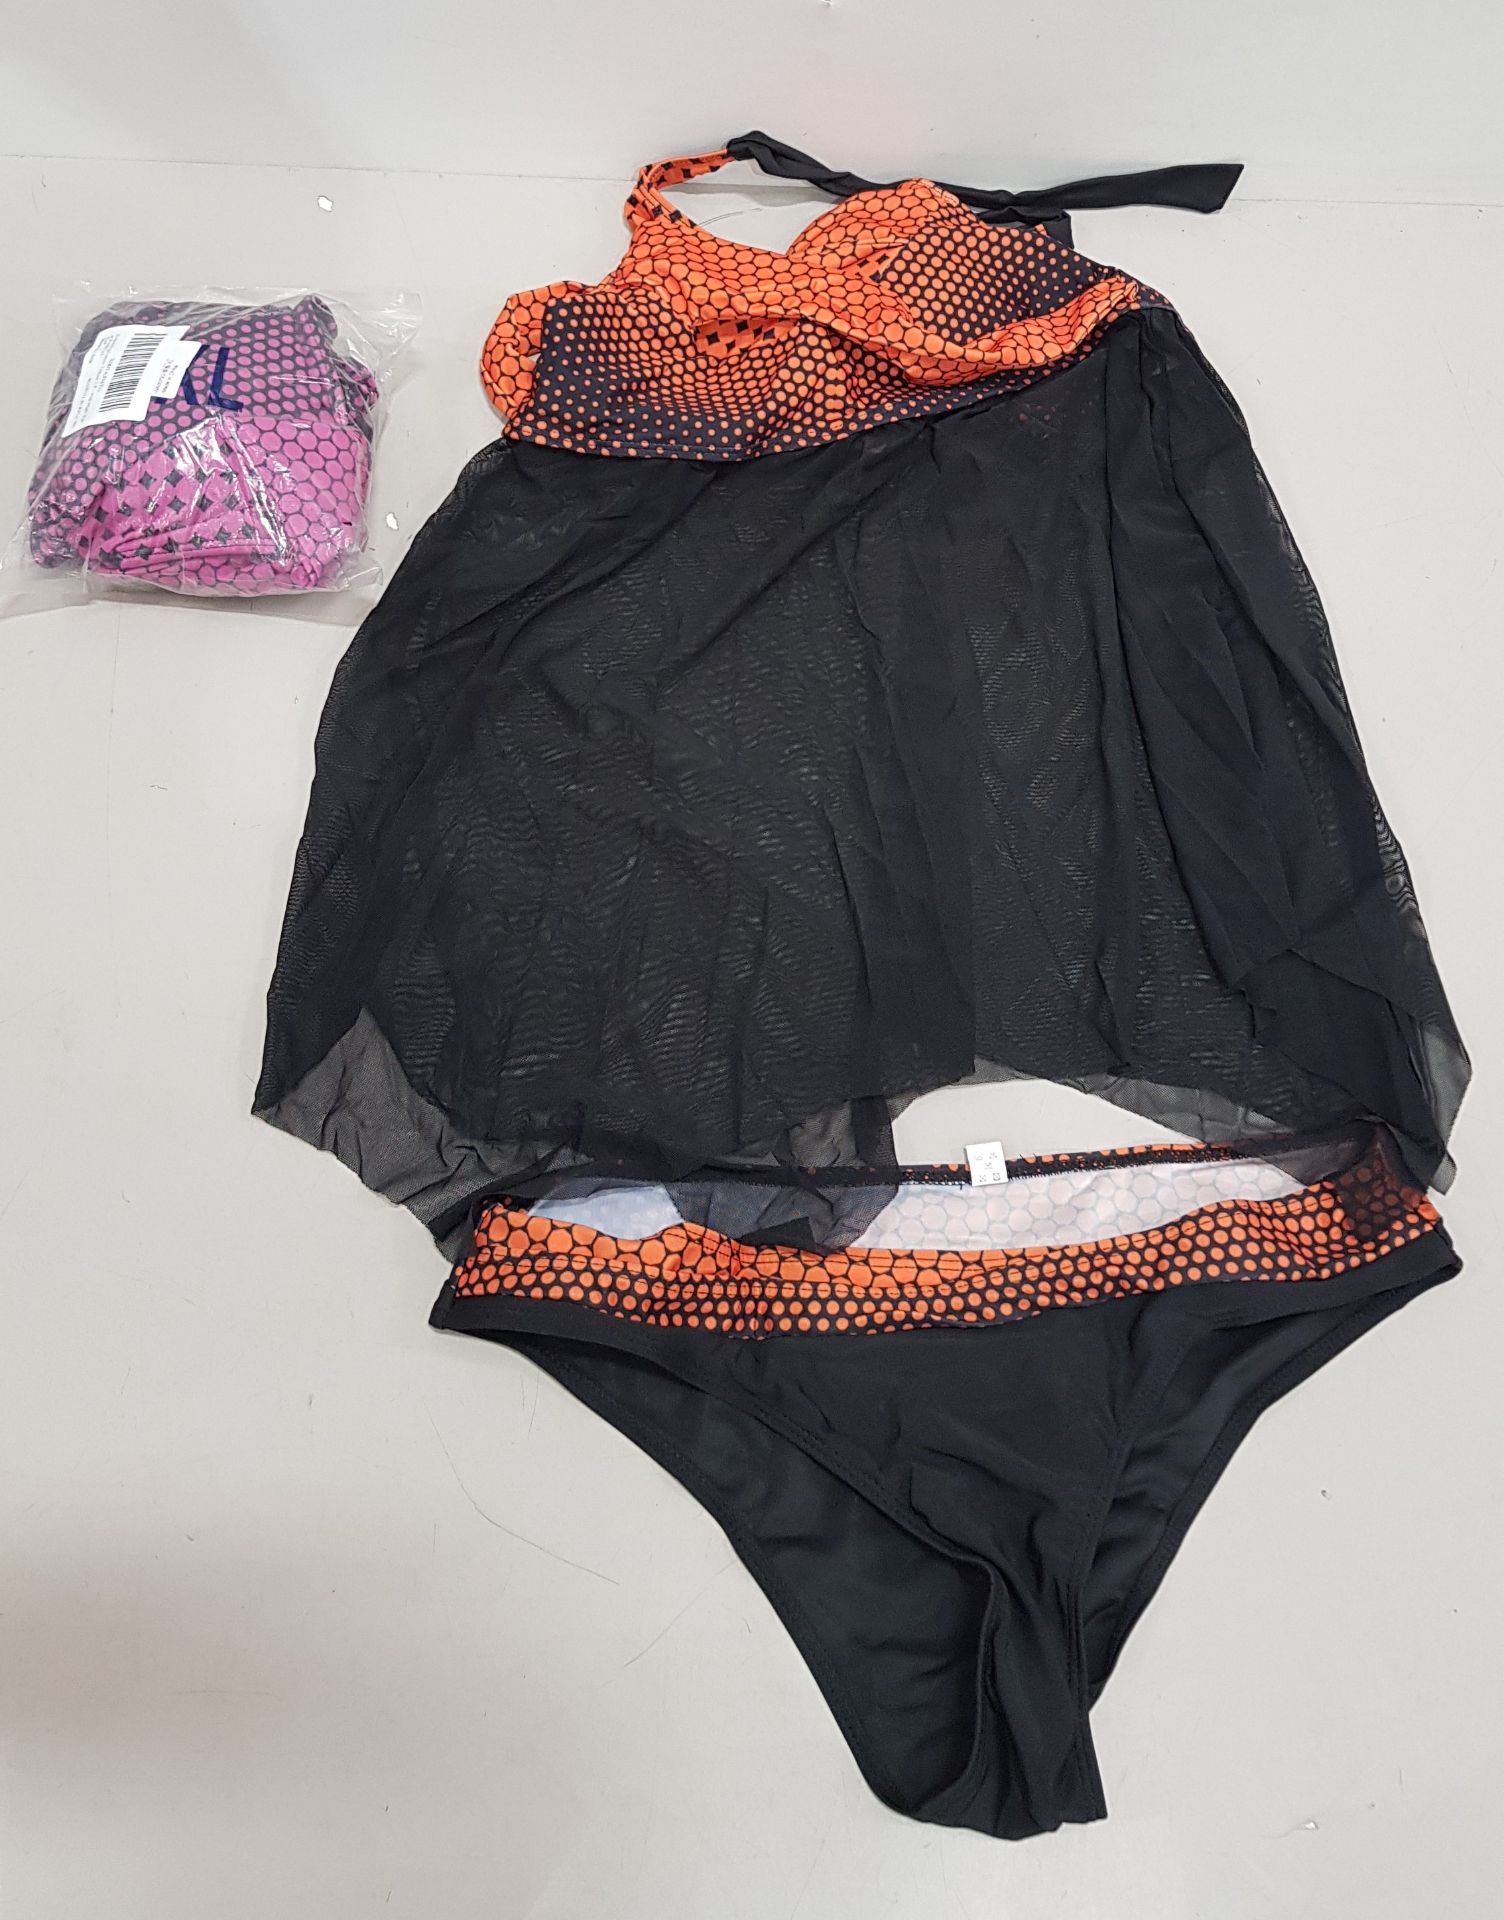 20 X BRAND NEW WOMENS 2 PIECE TANKINI BATHING SUIT SET IN ORANGE AND PINK IN SIZES XL AND 2XL